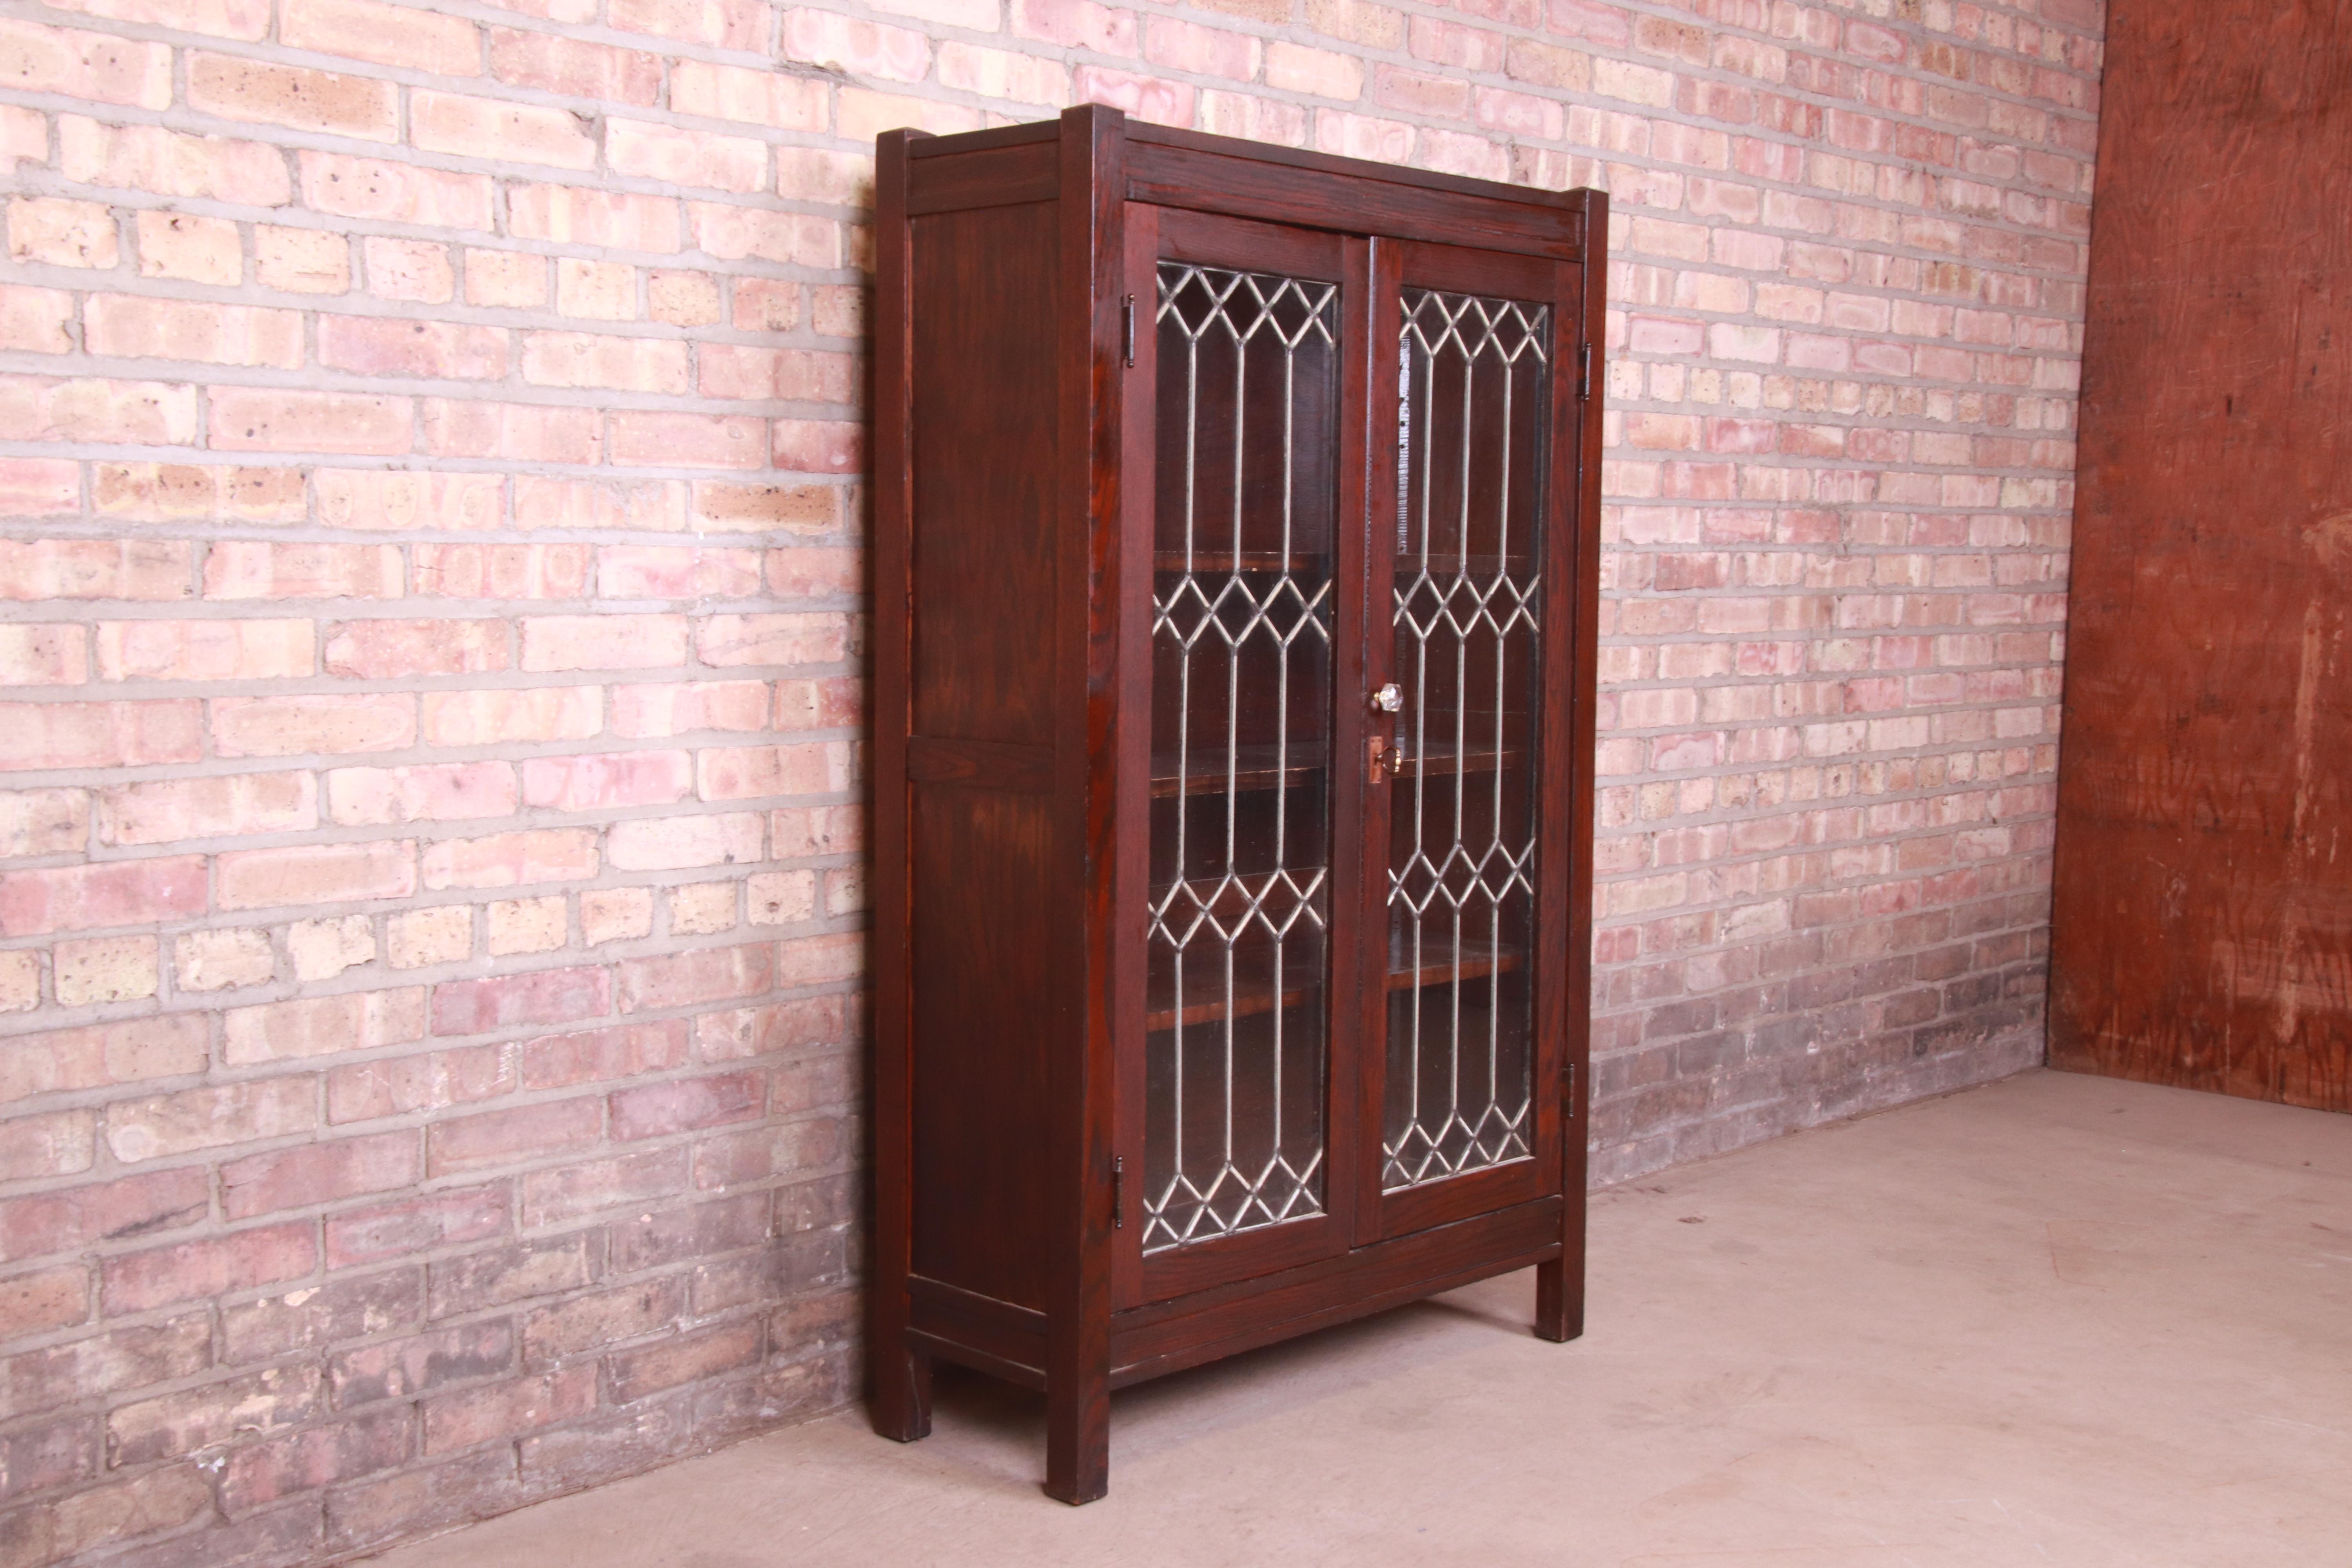 A beautiful antique Arts & Crafts bookcase cabinet

In the manner of Stickley

USA, Circa 1900

Oak, with leaded glass doors.

Measures: 34.25